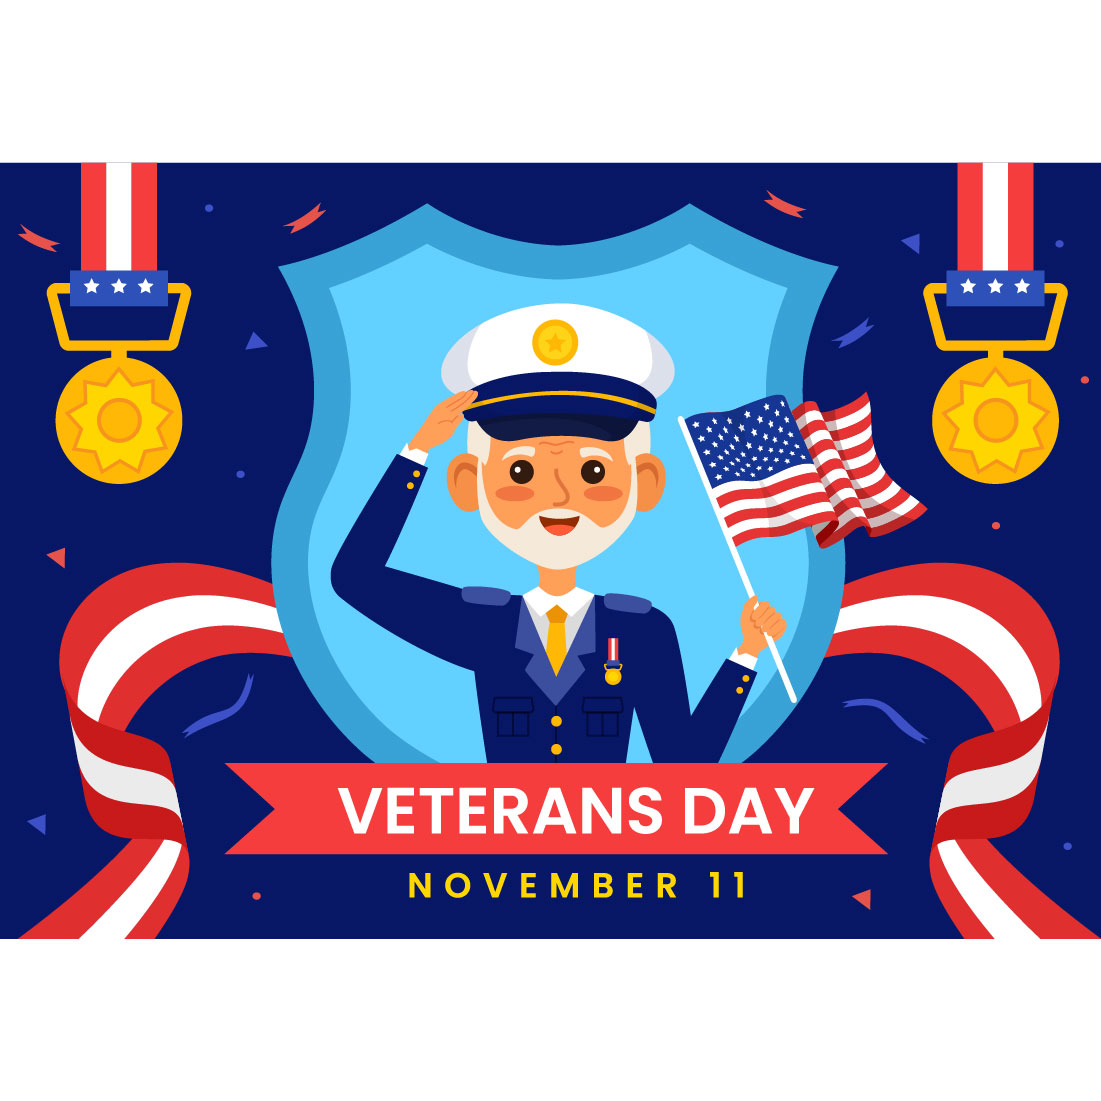 12 Happy Veterans Day Illustration cover image.